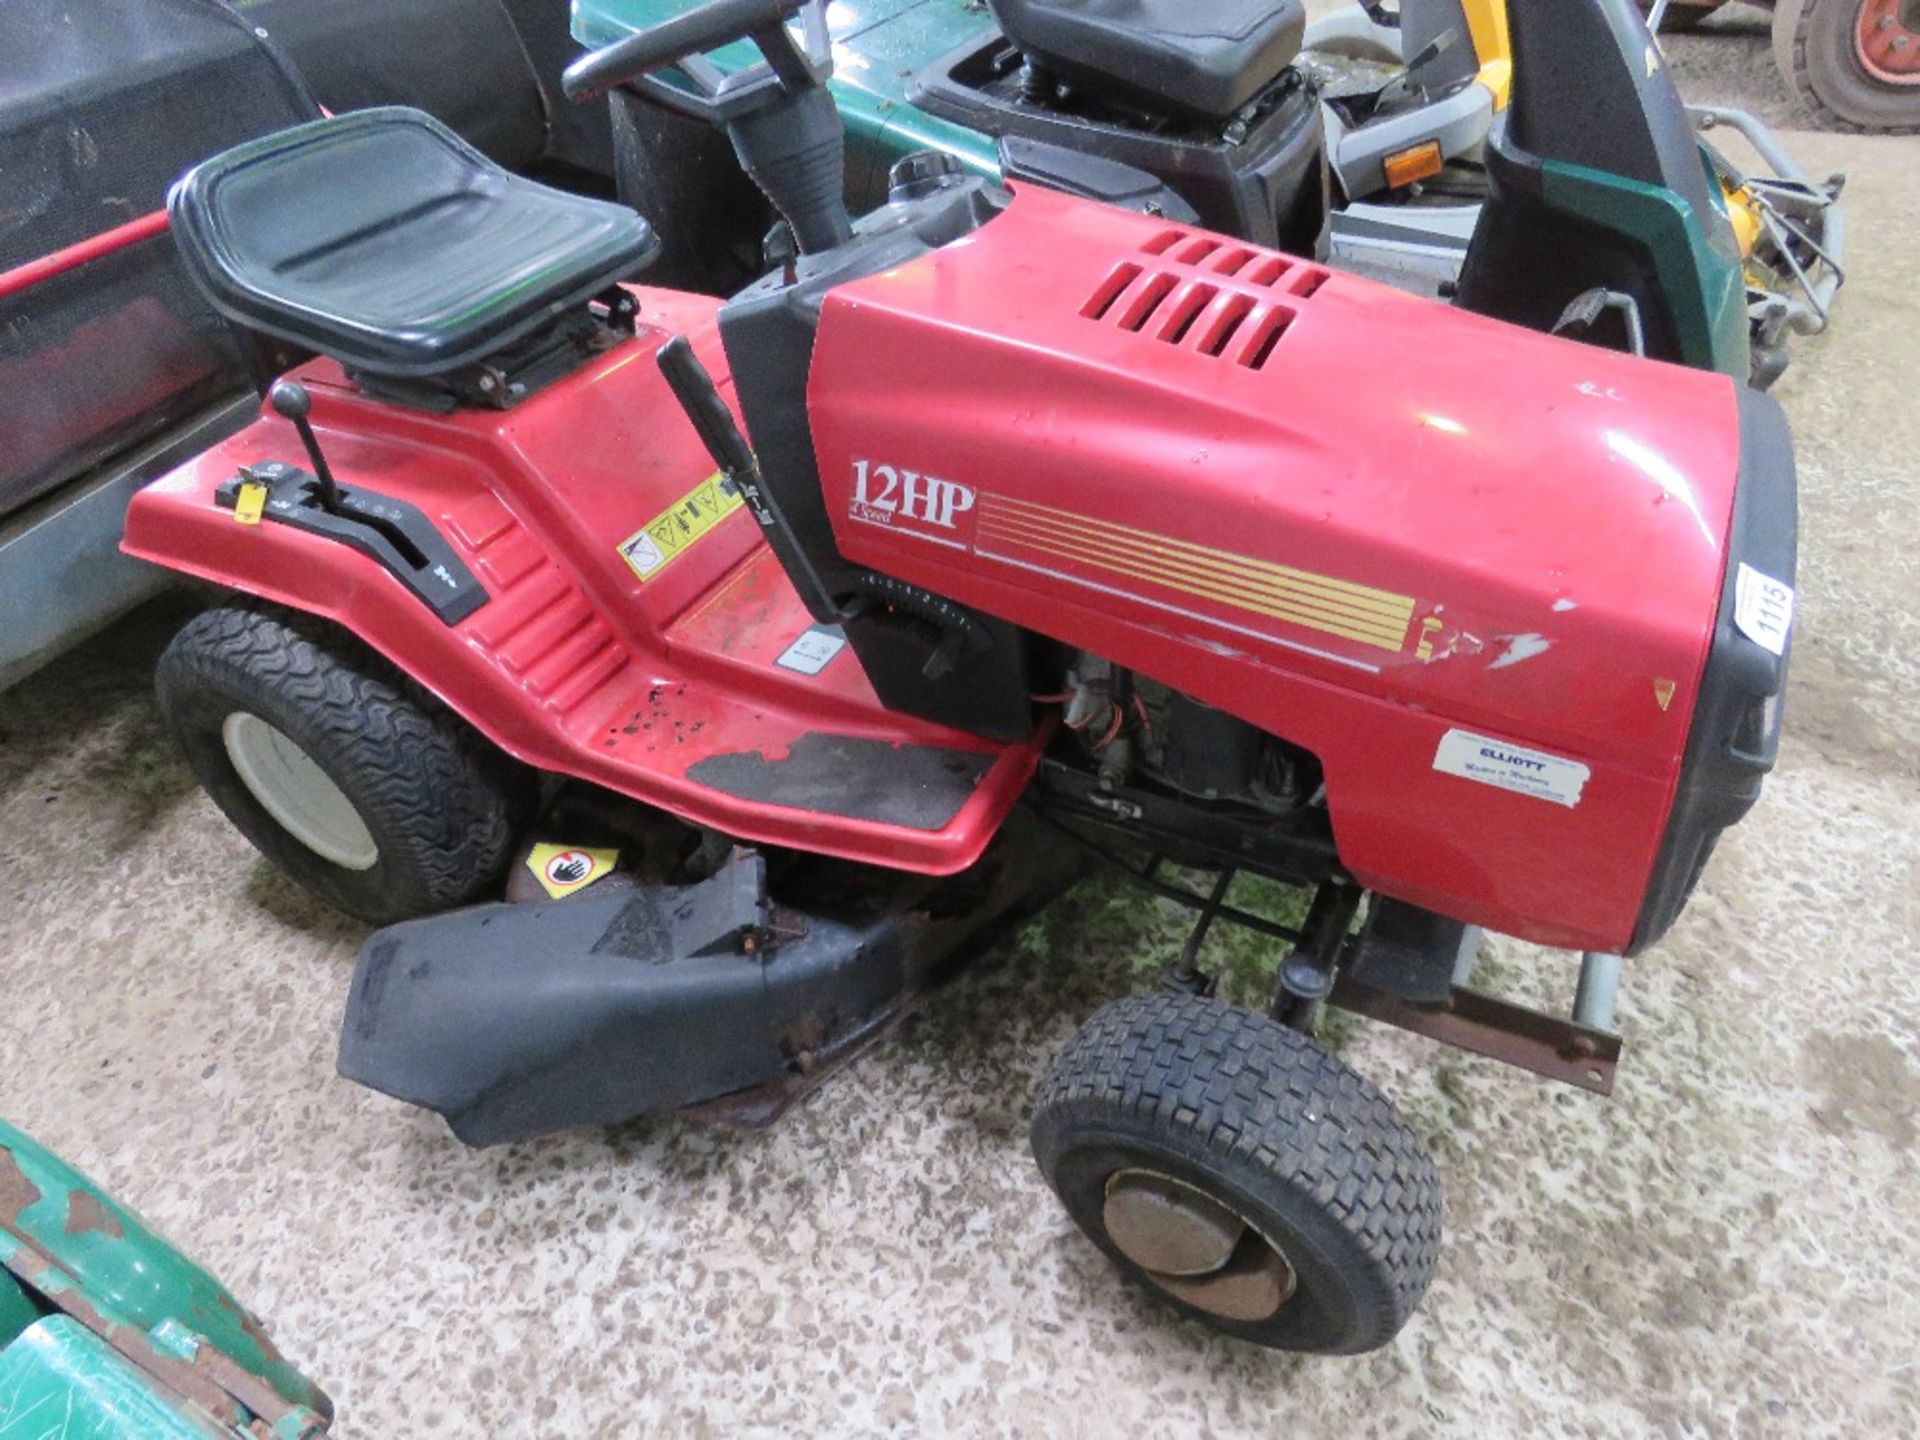 RALLY 12HP RIDE ON MOWER. WHEN BRIEFLY TESTED WAS SEEN TO RUN AND MOWERS ENGAGED.